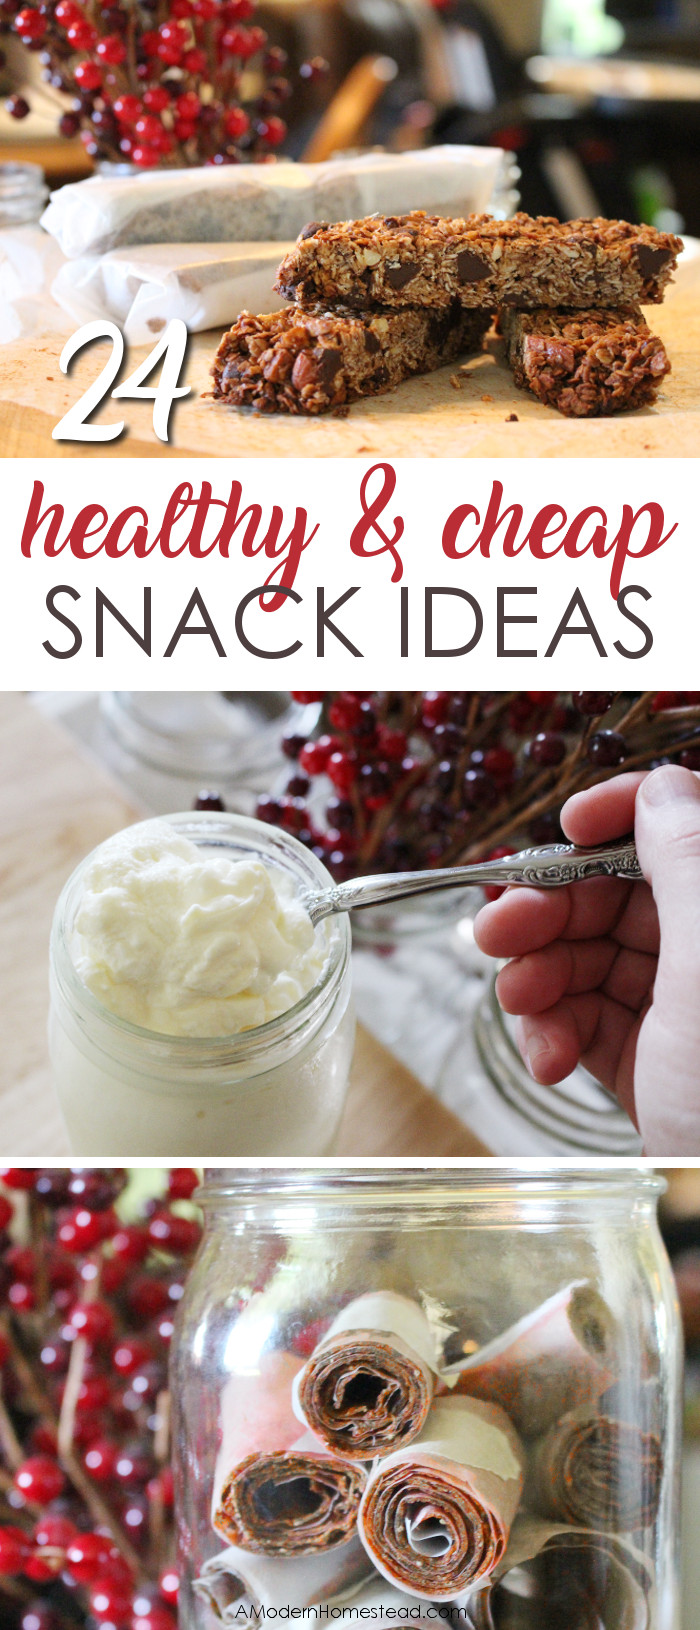 Healthy Inexpensive Snacks
 Bud Friendly Healthy Snack Ideas